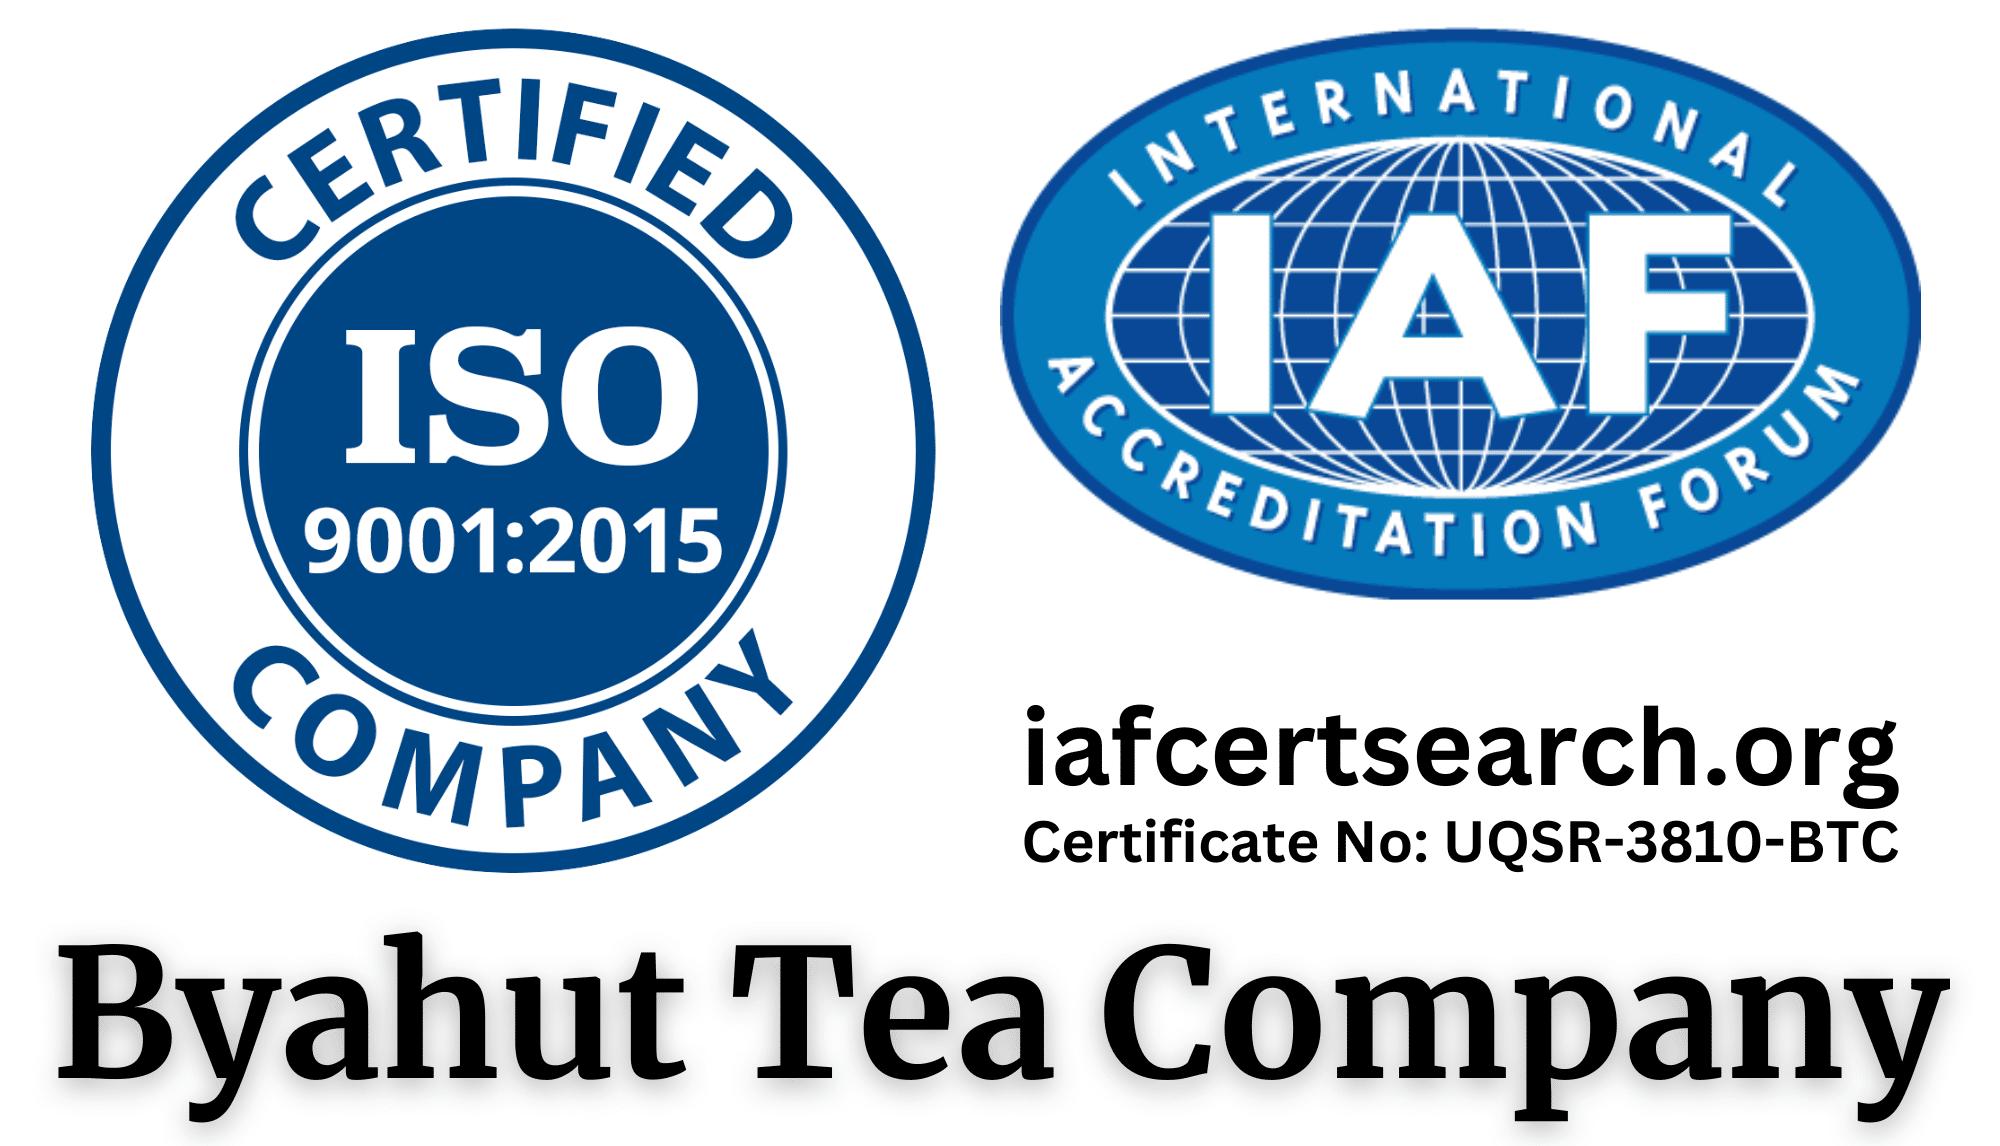 Byahut Tea Company, an ISO 9001:2015 Certified Company with IAF accredited certification